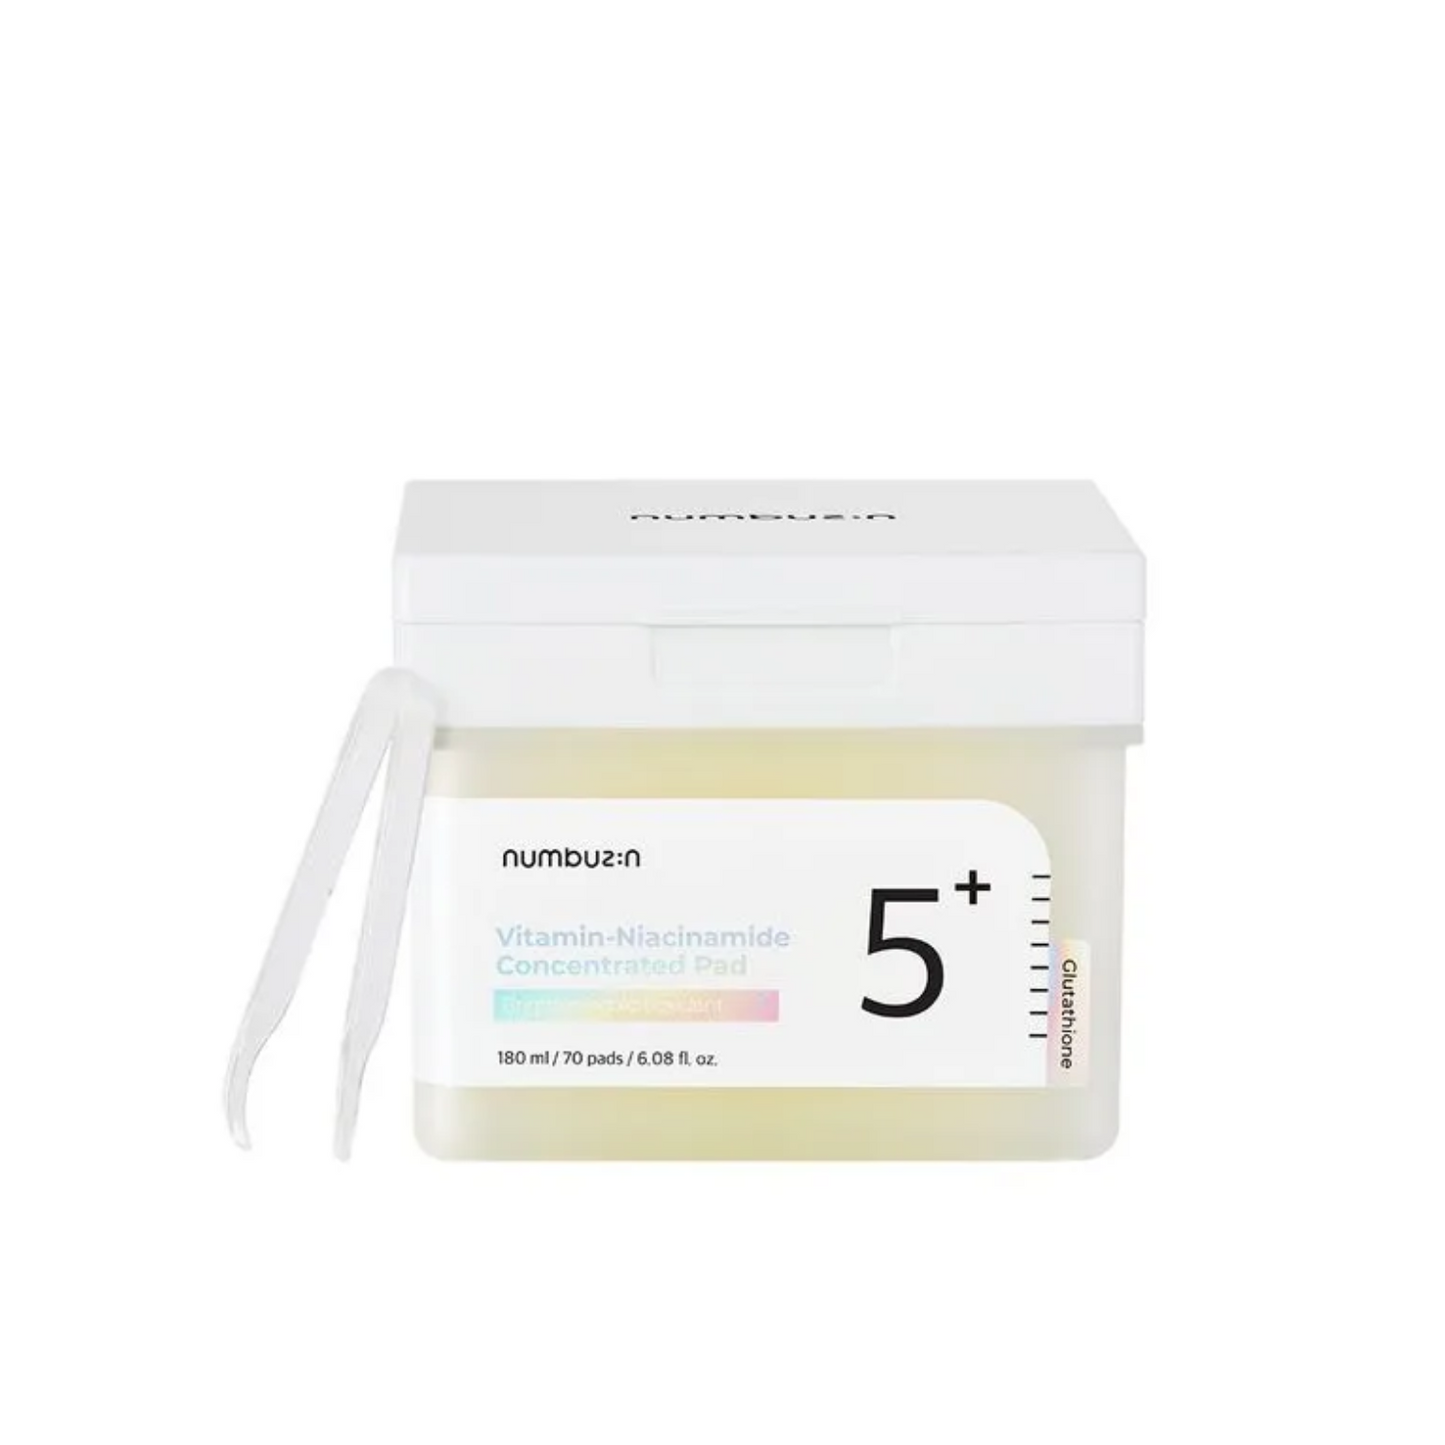 Numbuzin No.5 Vitamin Niacinamide Concentrated Pad (70pads)